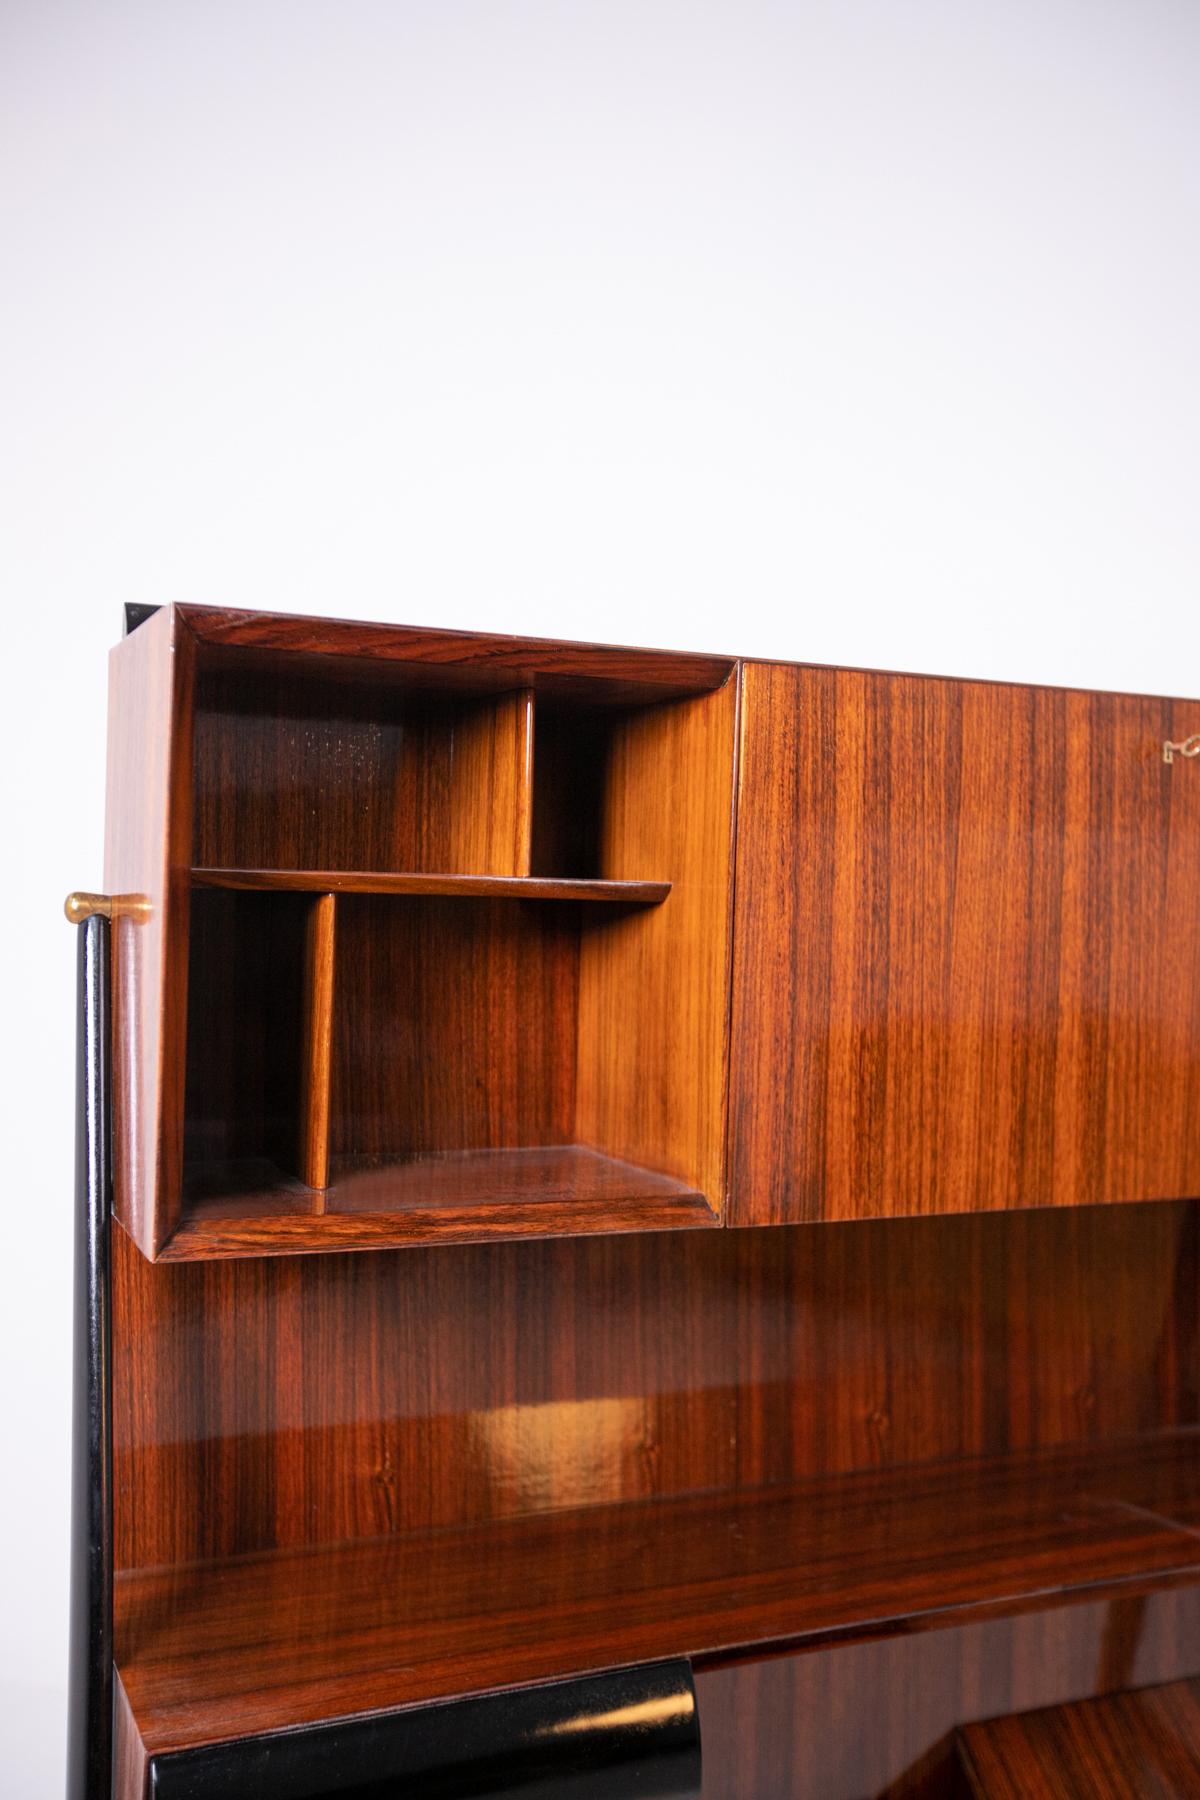 Bookcase attributed to Ico Parisi inwood and ebonized wood, 1950s.
The elegant bookcase has a Dual function it can also serve as a sideboard or closet. Made of wood and high quality ebonized wood, the bookcase has several compartments, shelves and